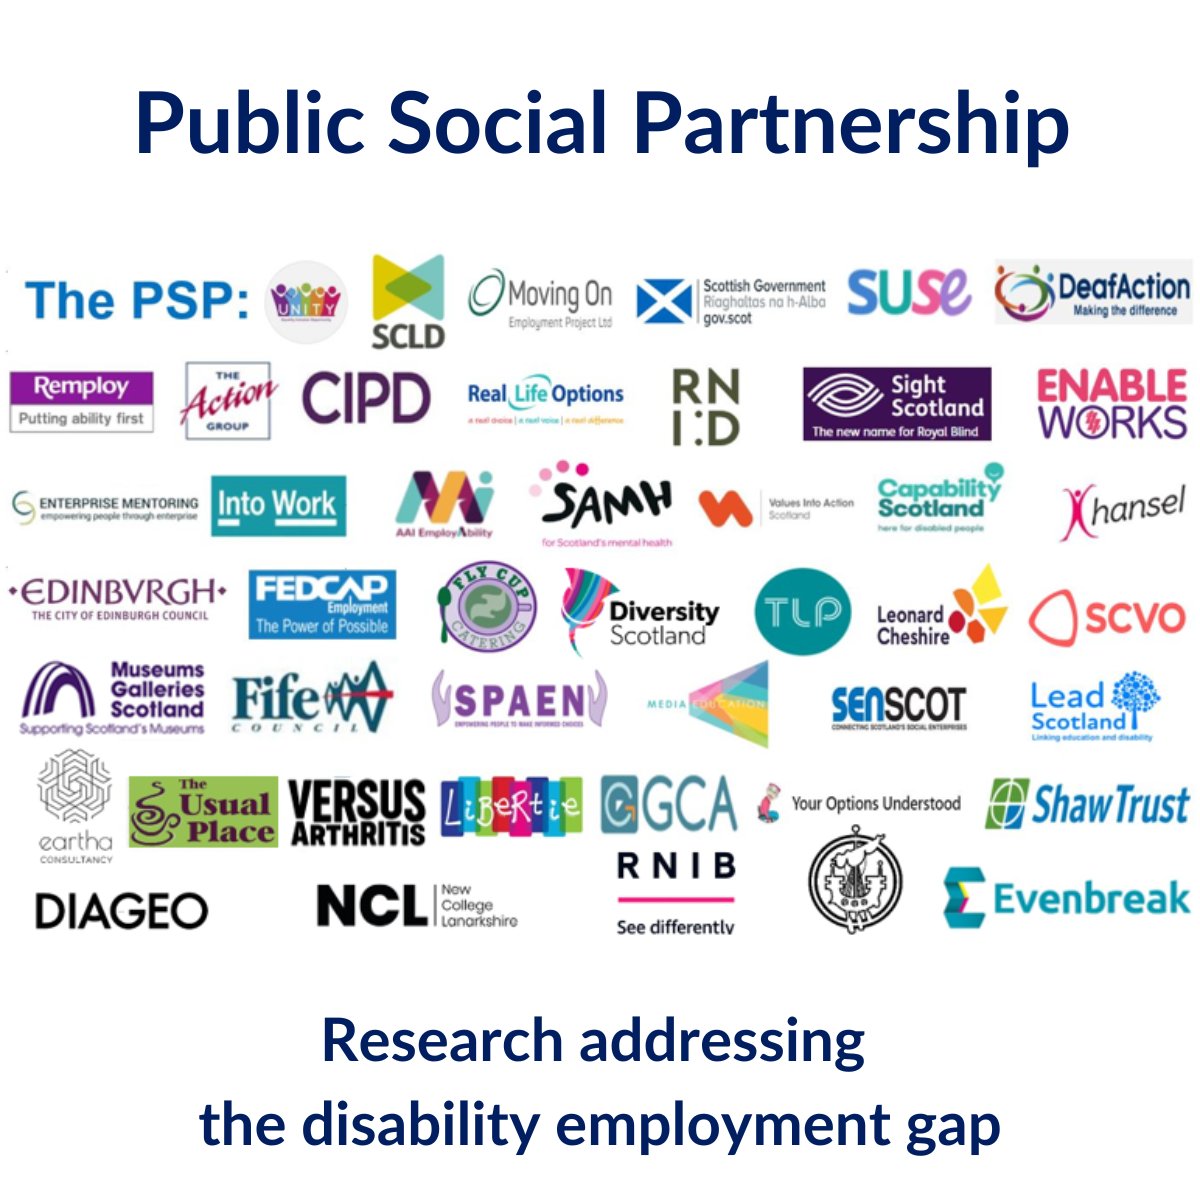 We are currently co-designing of a Theory of Change with Scottish Union of Supported Employment.

We’re providing performance management frameworks to focus their delivery of pilot projects that aim to close the wide gap between employment of disabled and non-disabled people.